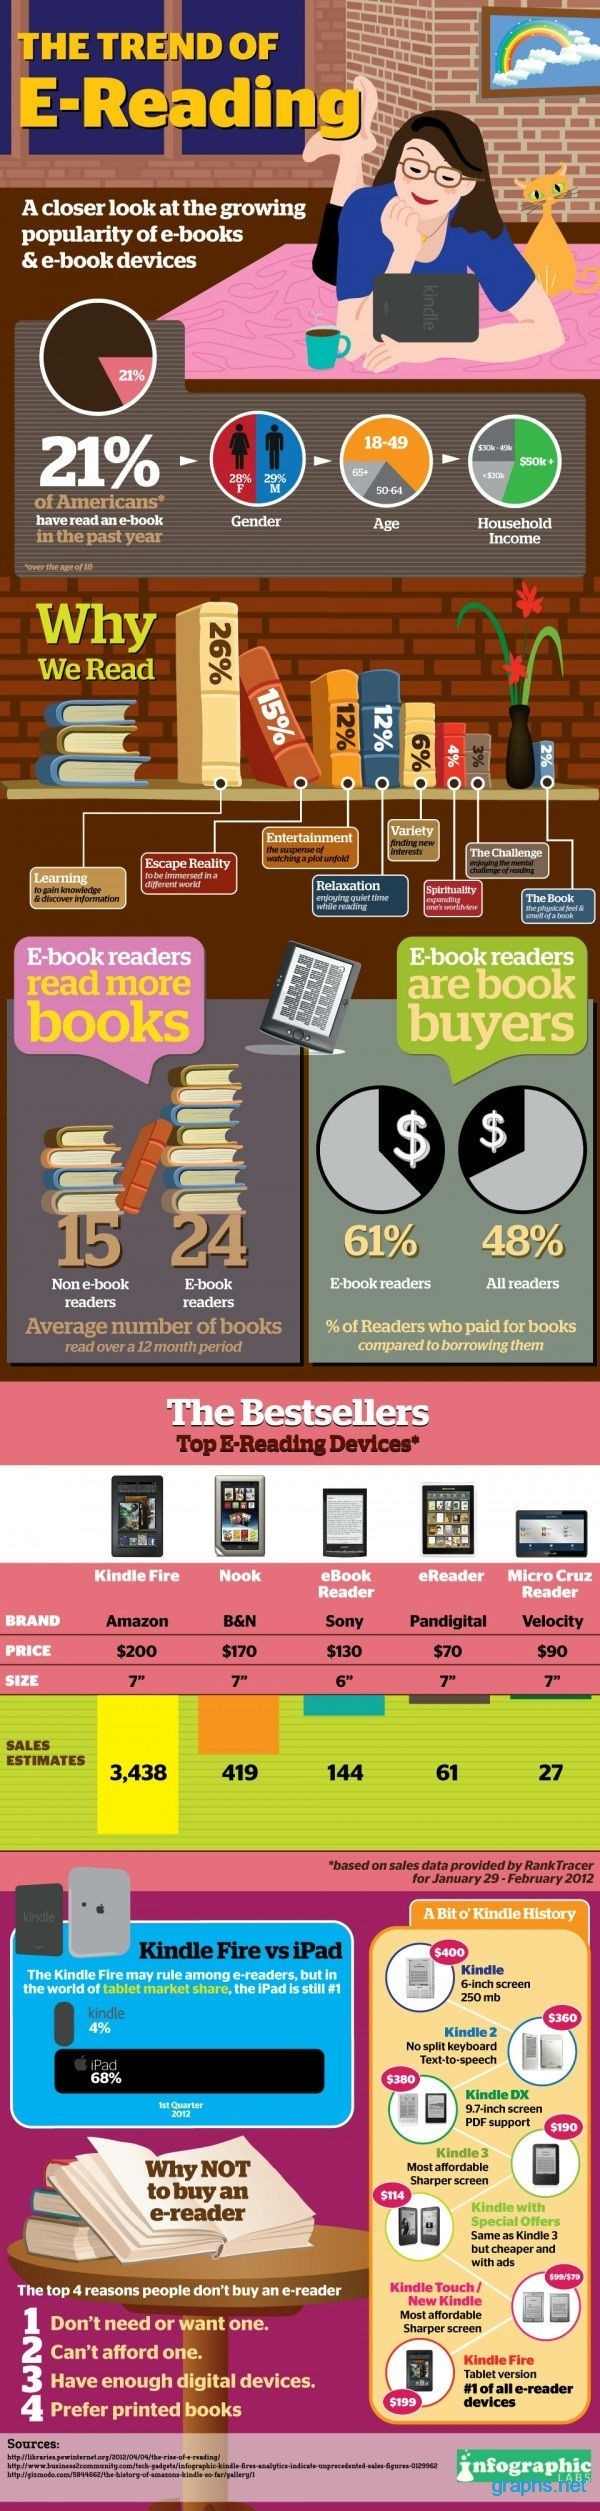 ebook facts and figures